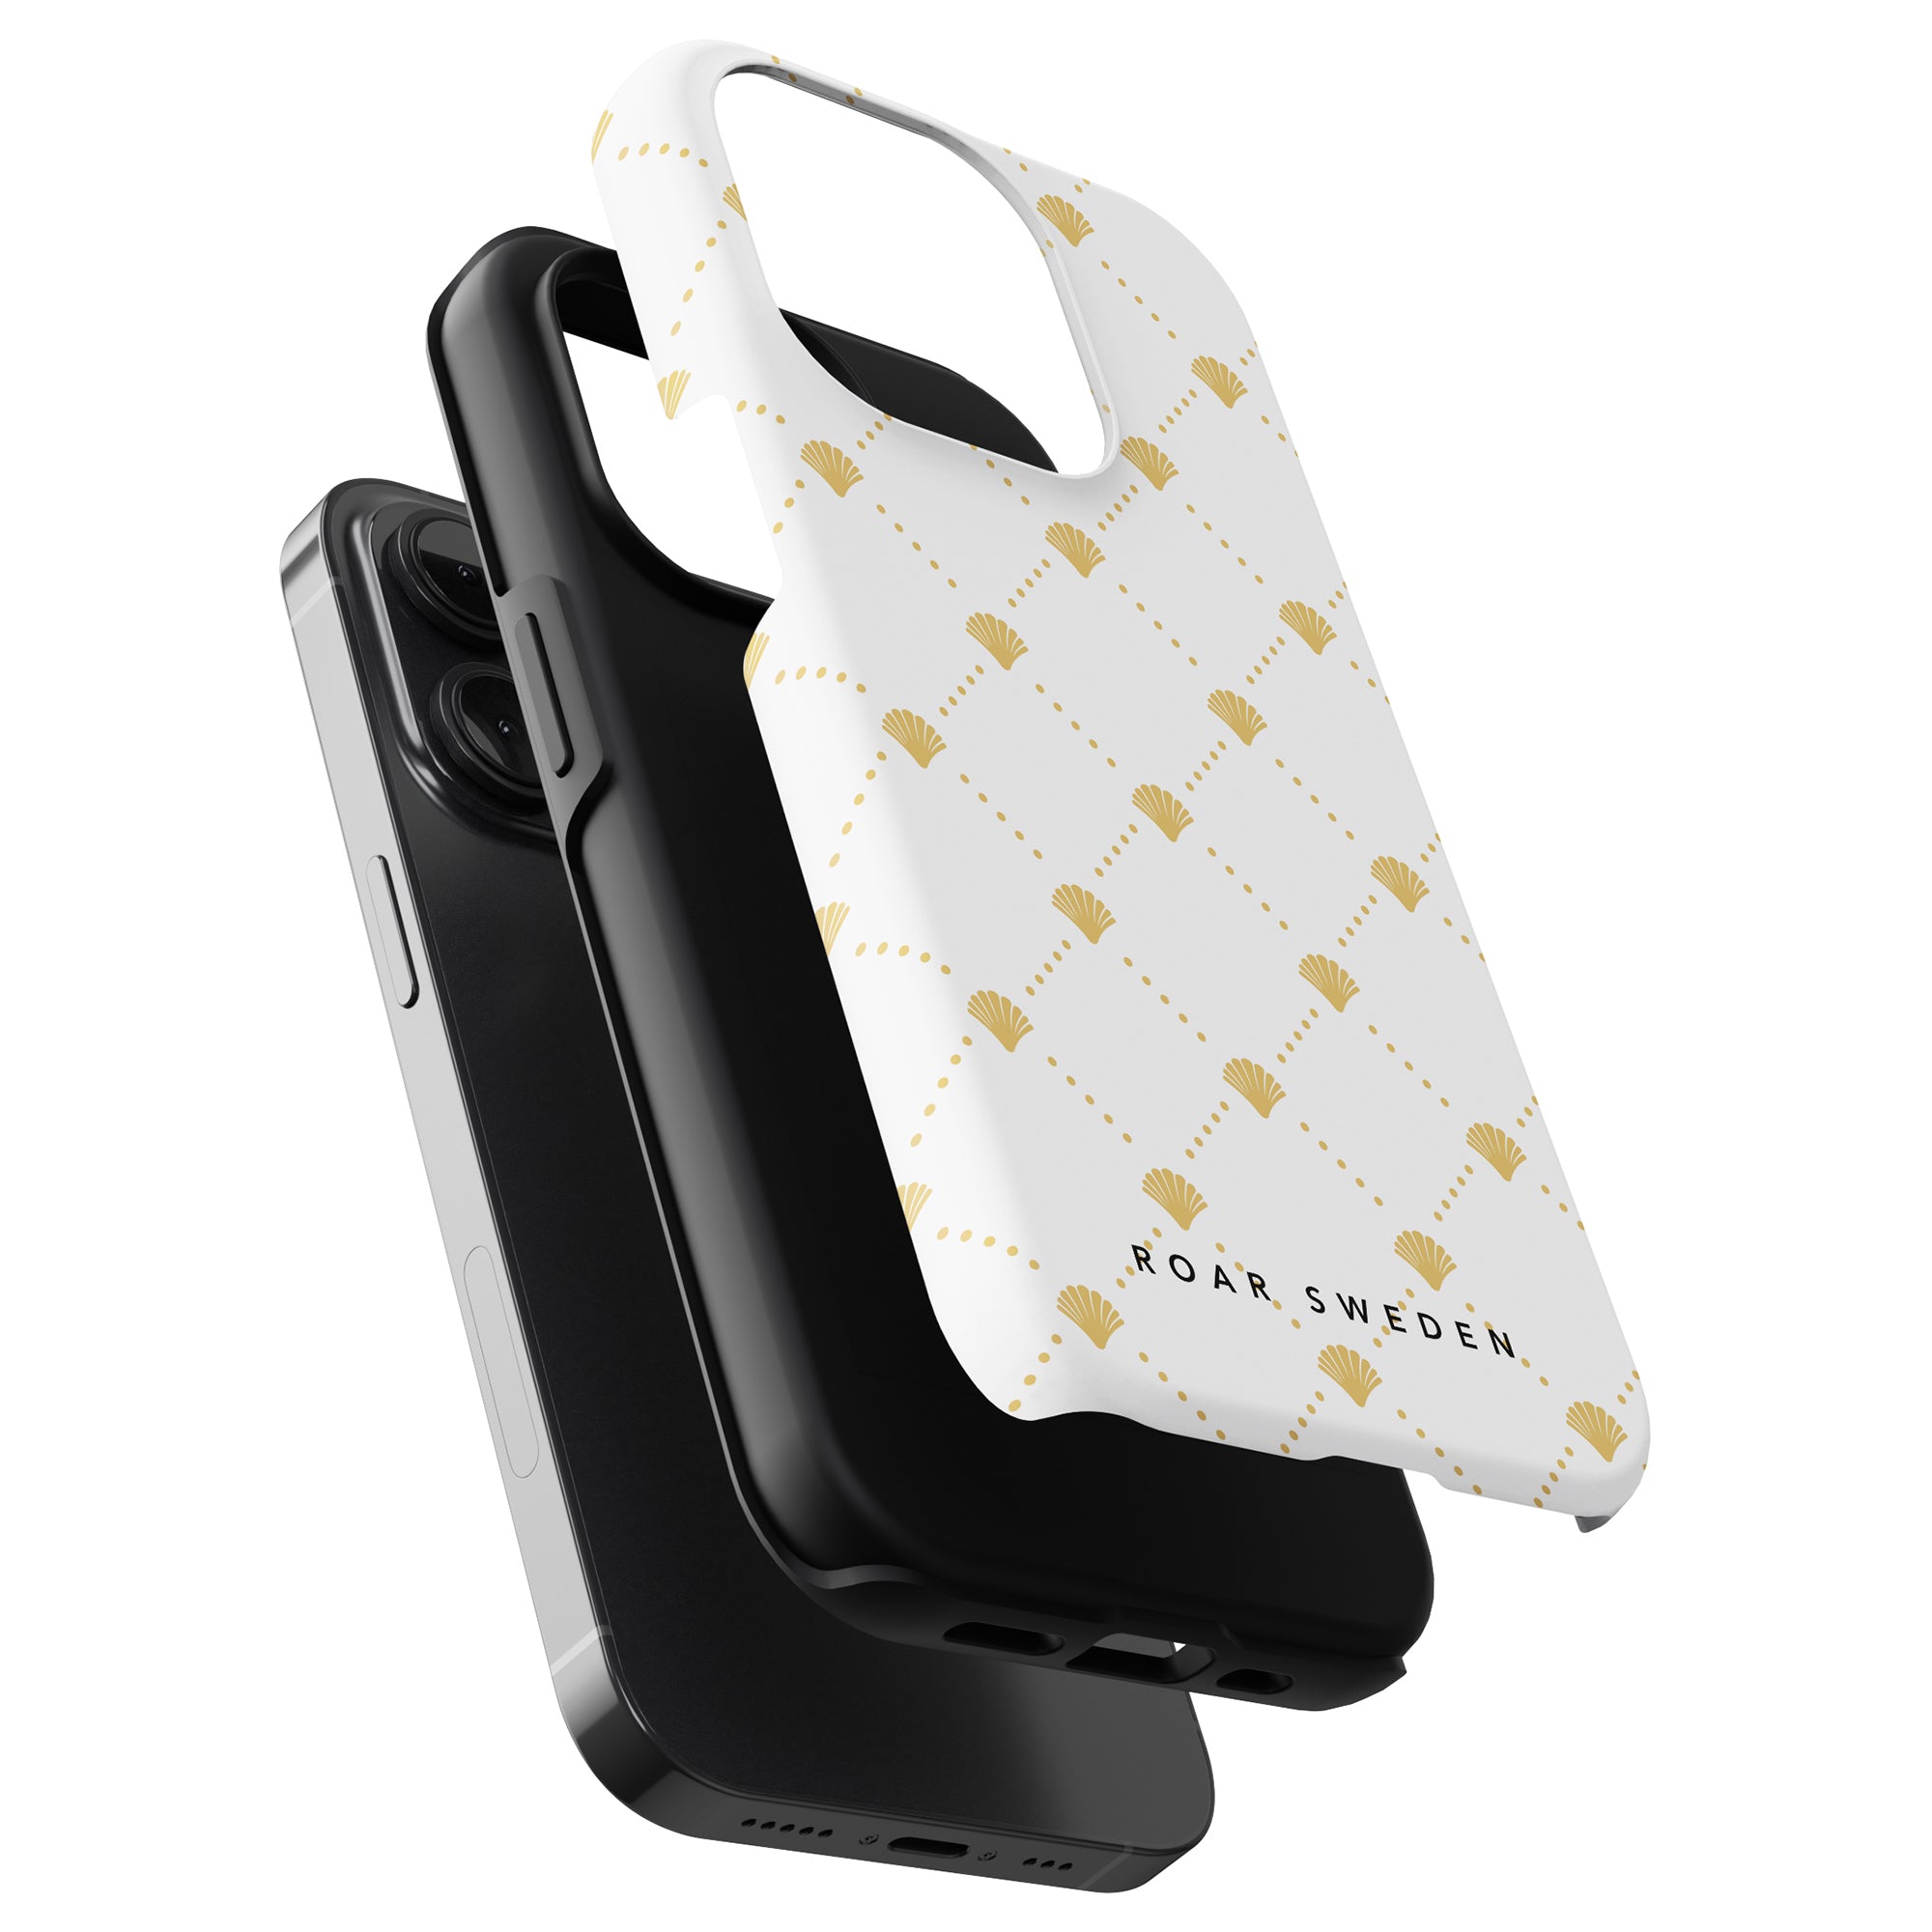 Three smartphone cases are displayed: one Luxe Shells White - Tough Case with a gold pattern and "ROAR SWEDEN" printed at the bottom, one black, and one matte black.